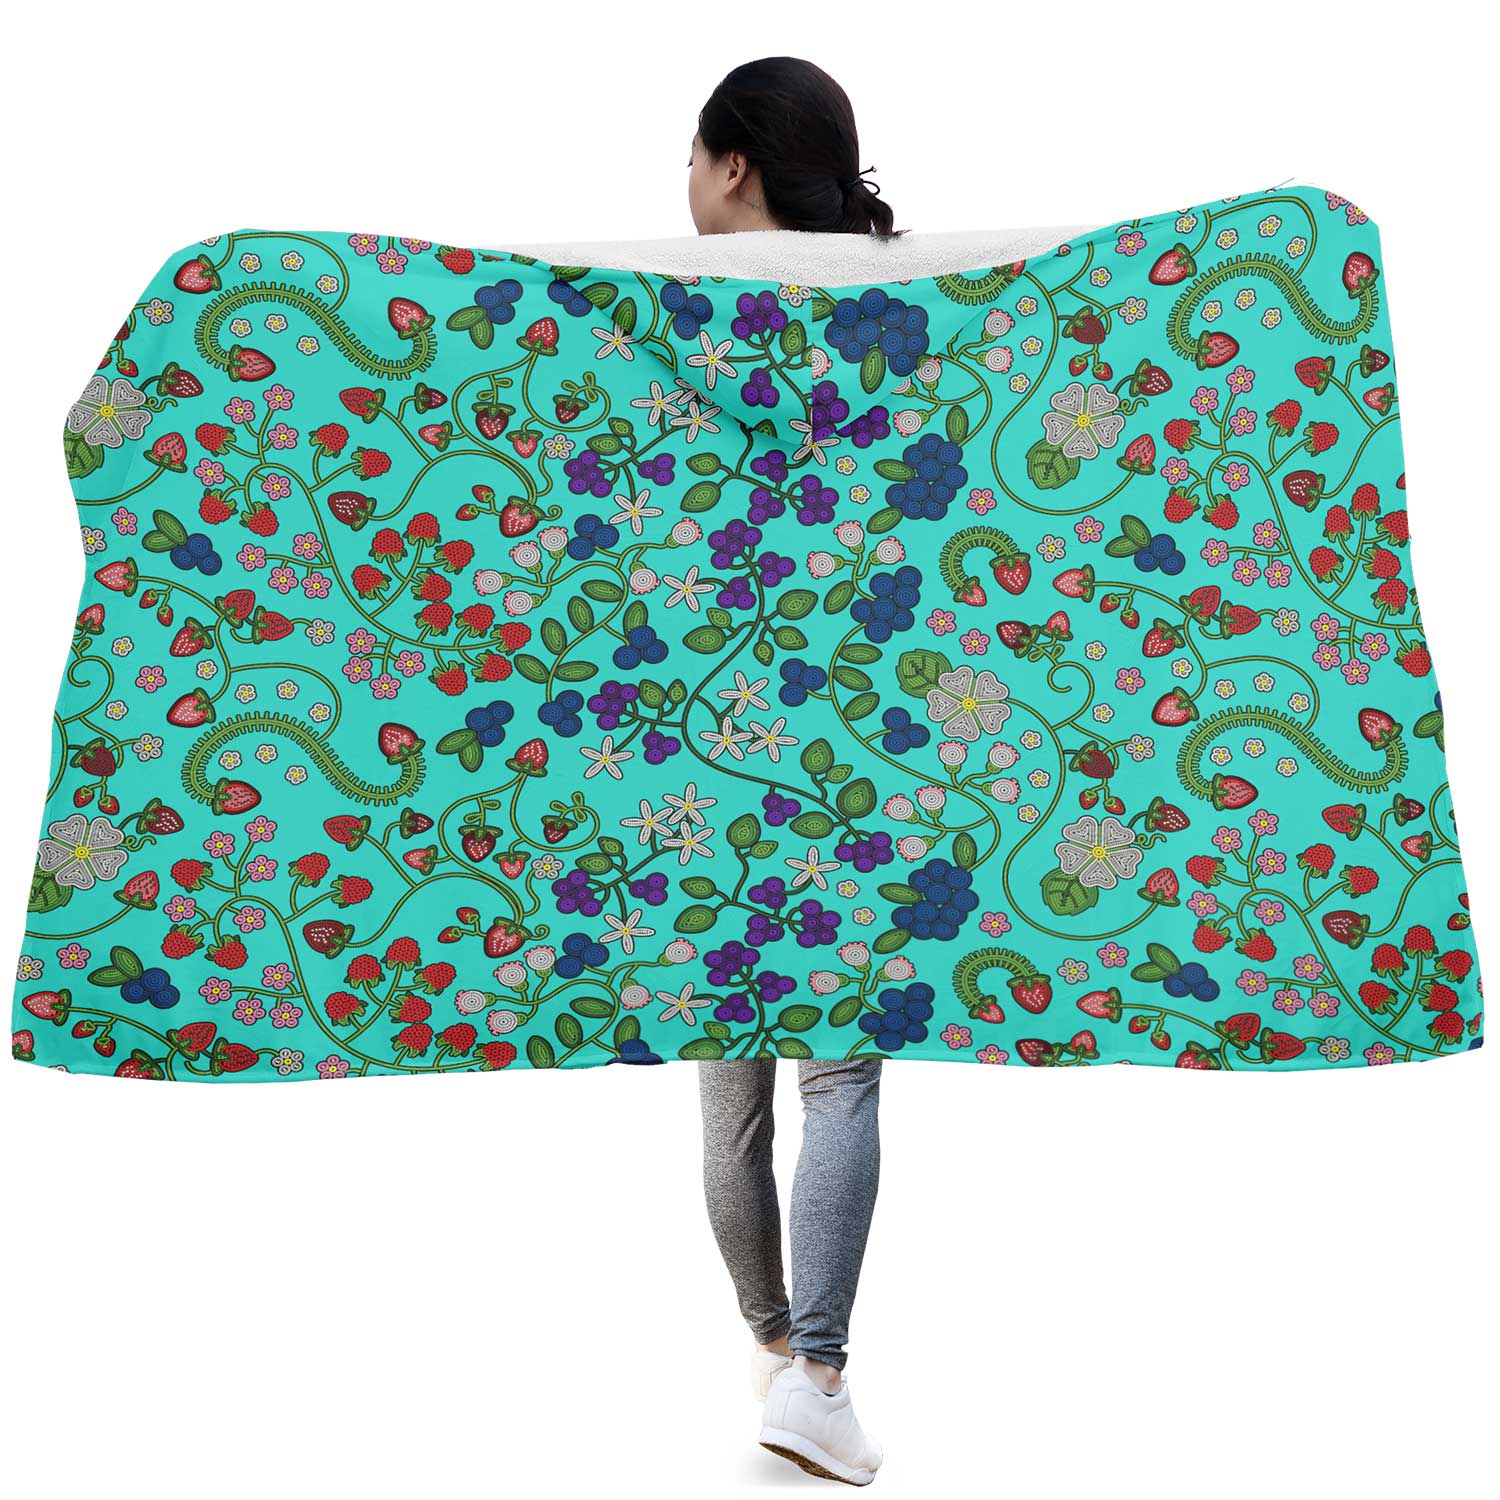 Grandmother's Stories Turquoise Hooded Blanket